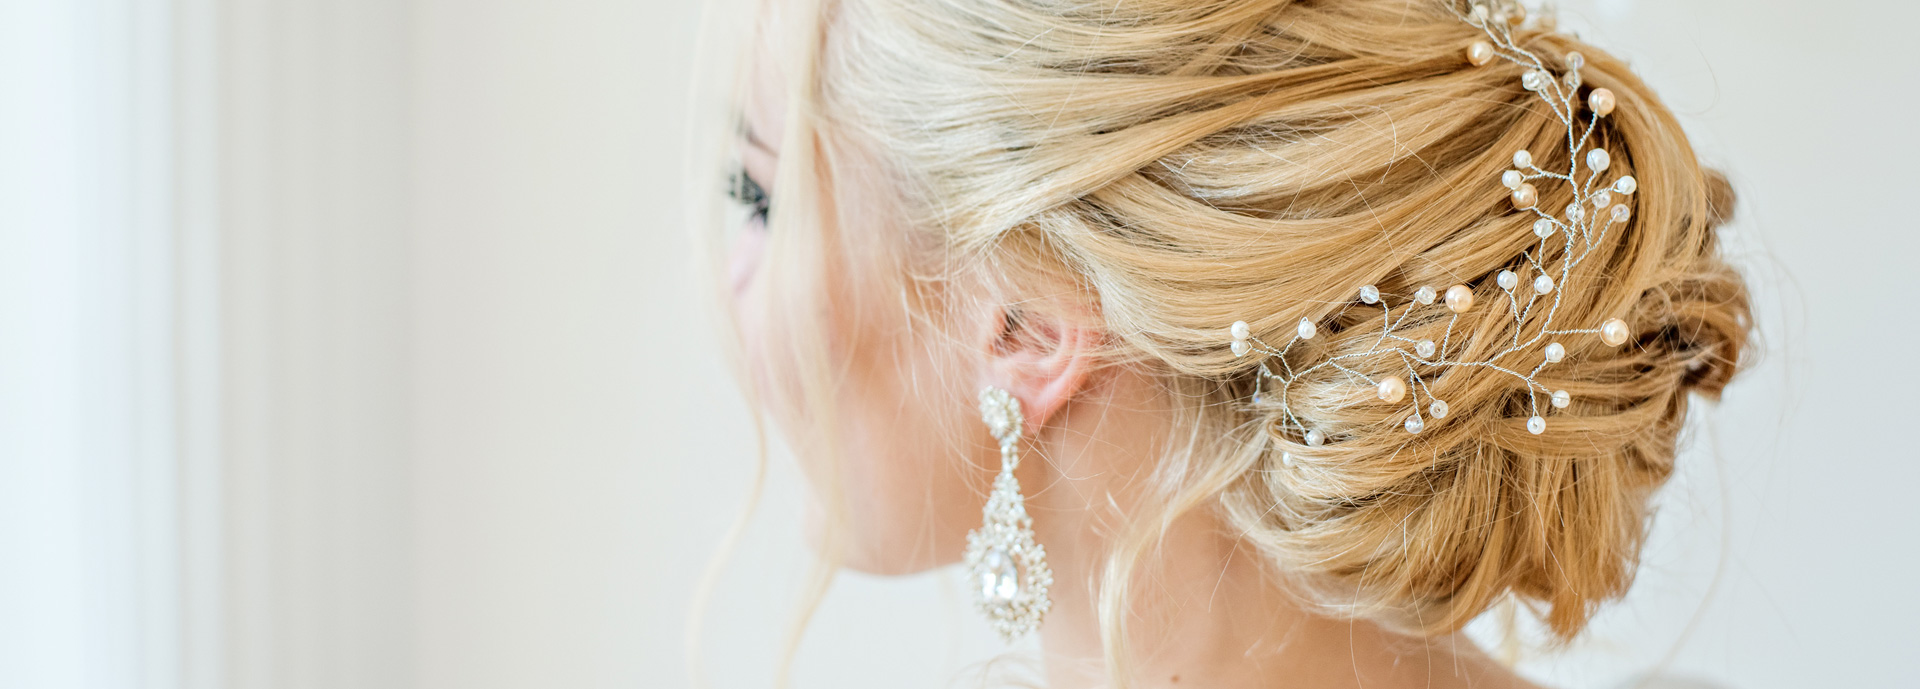 Wedding Hair and Makeup West Sussex